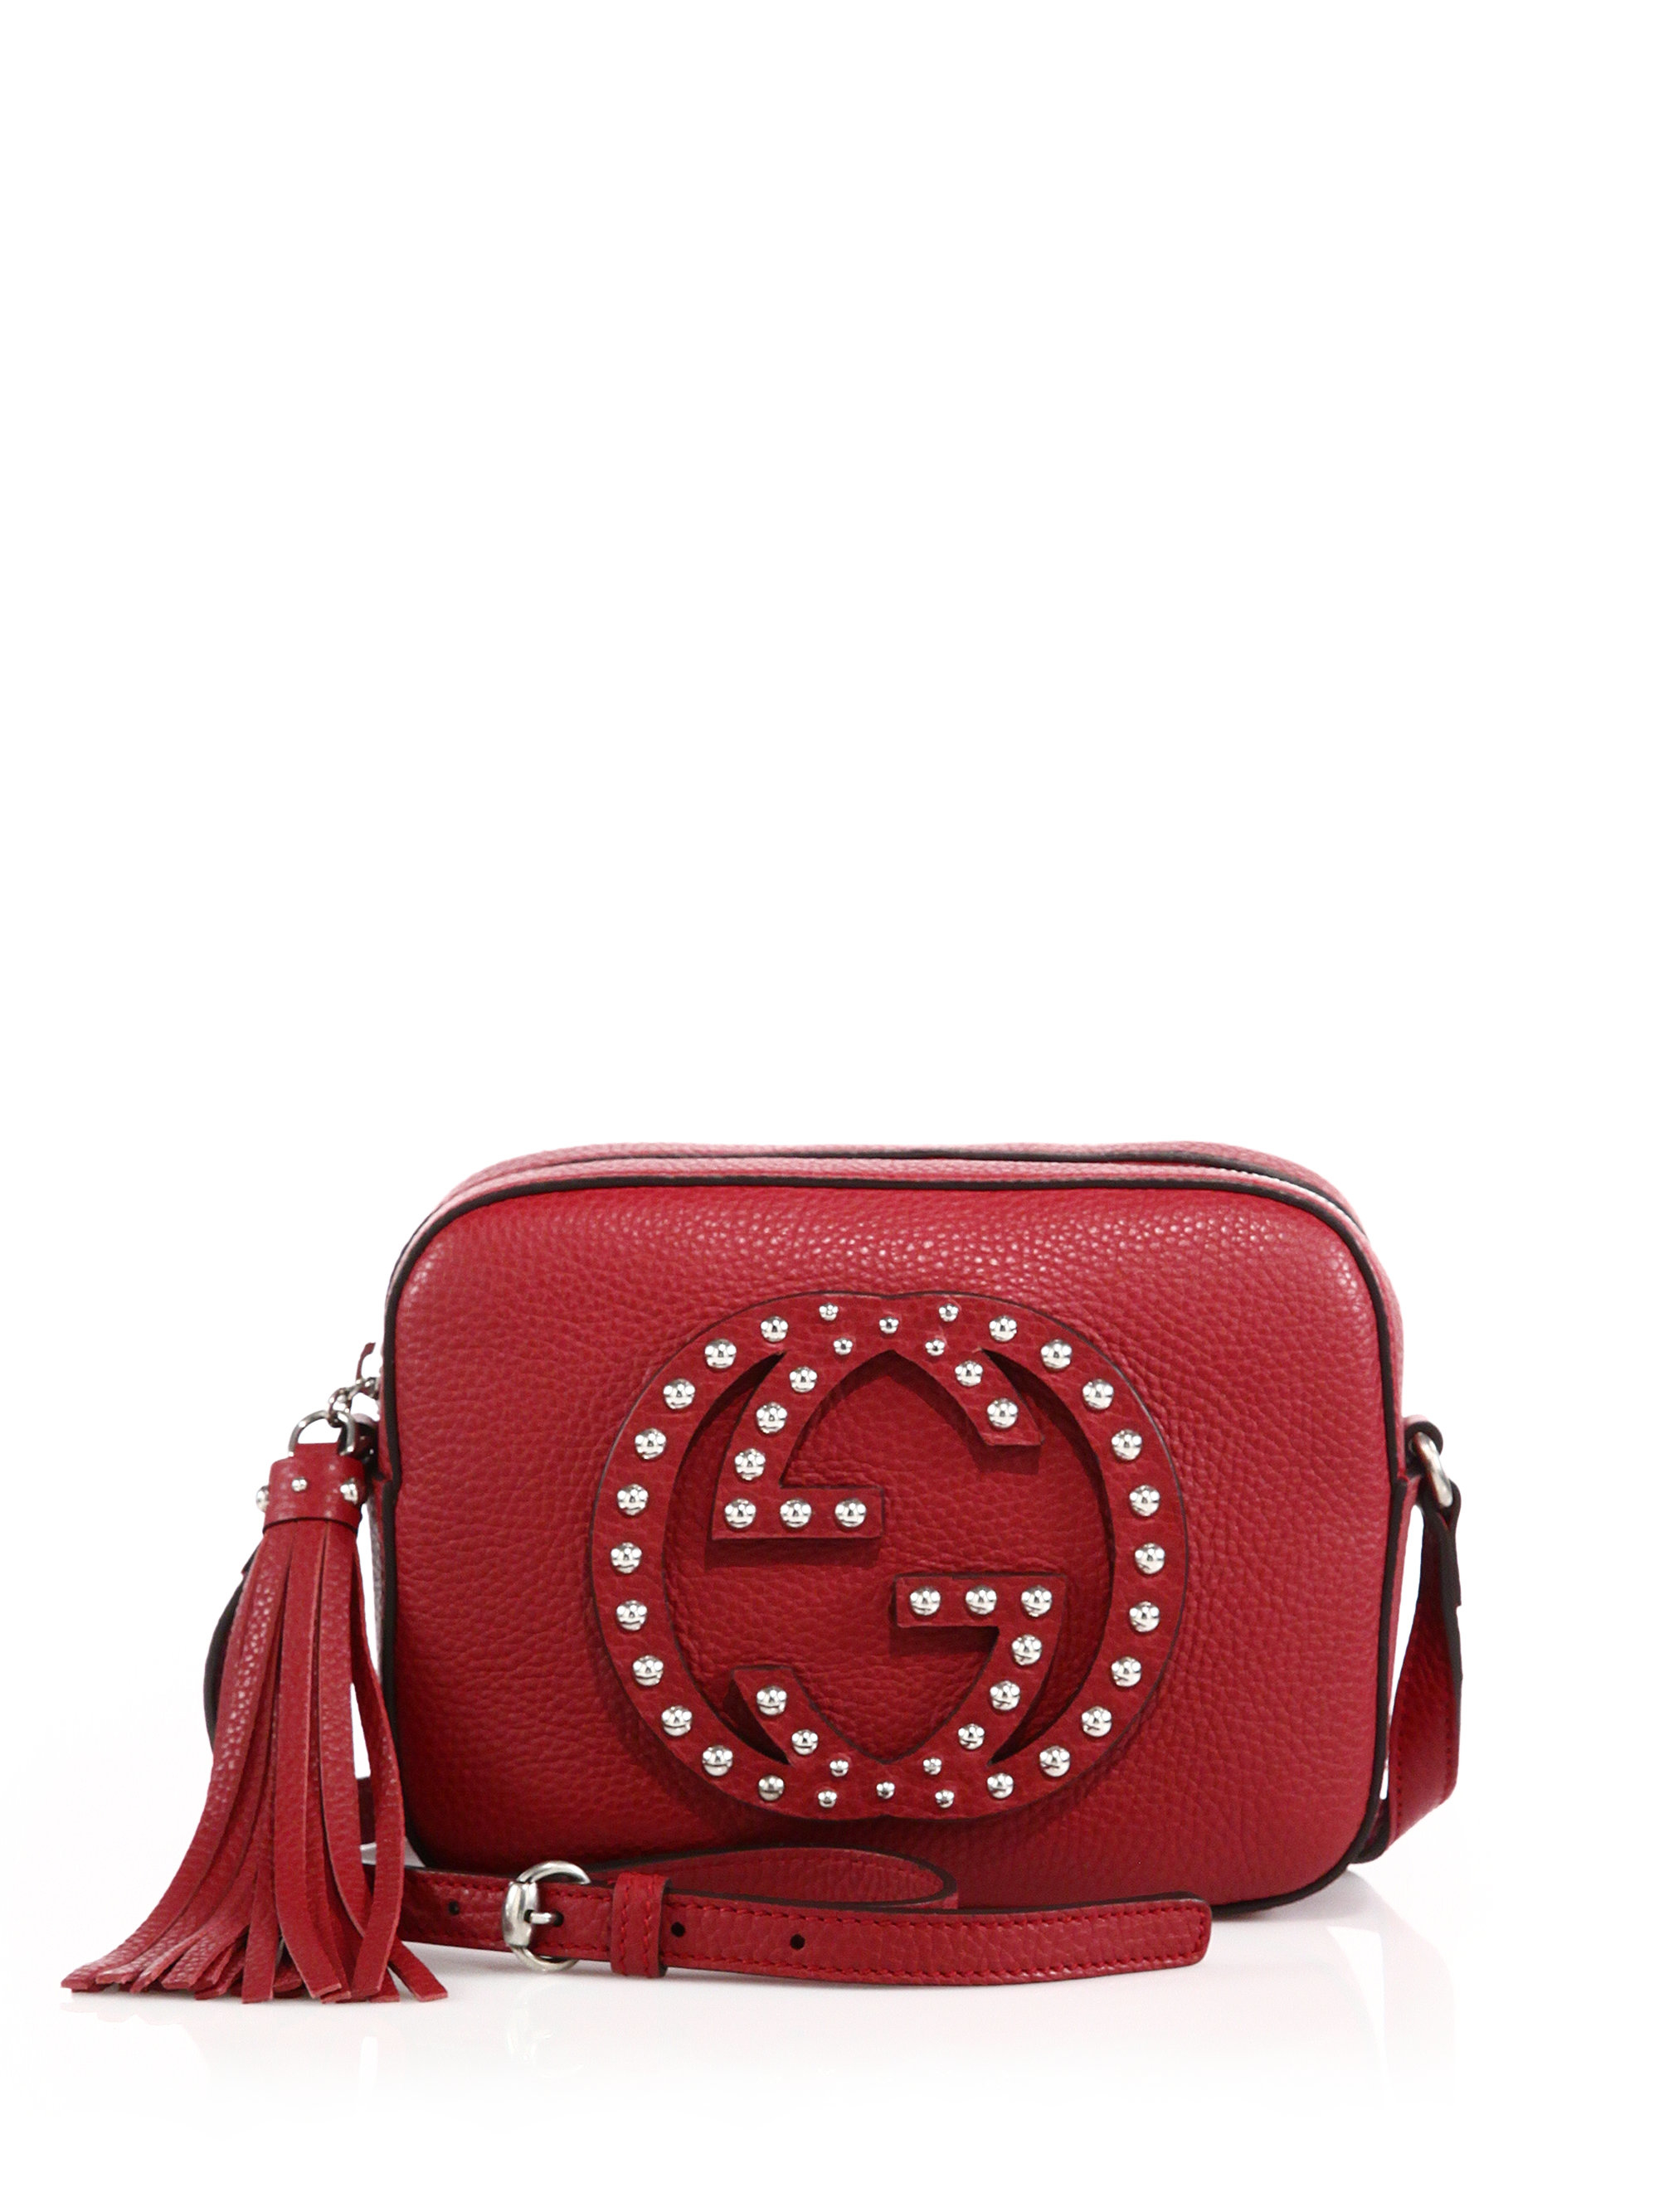 Gucci Soho Small Studded Leather Disco Bag in Red (burgundy) | Lyst